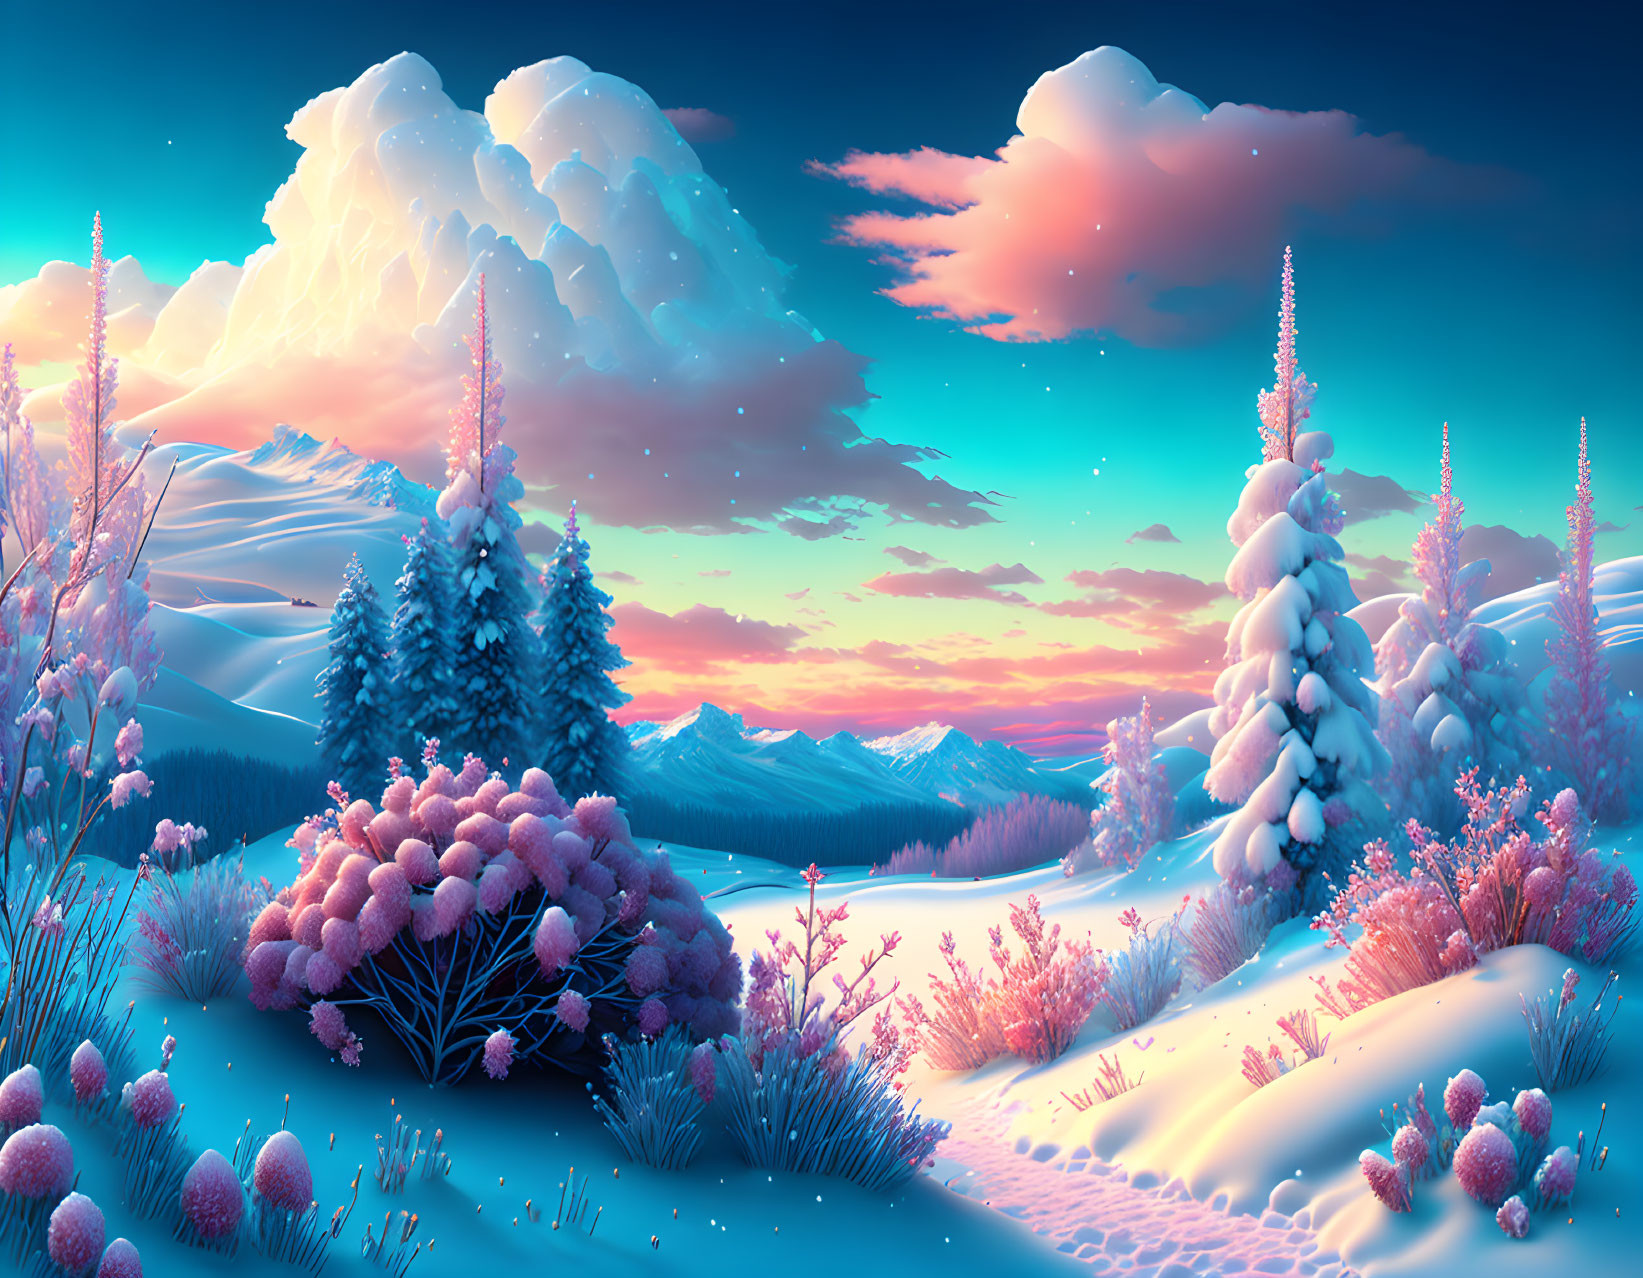 Snow-covered trees, sunset sky, and mountain range in winter landscape